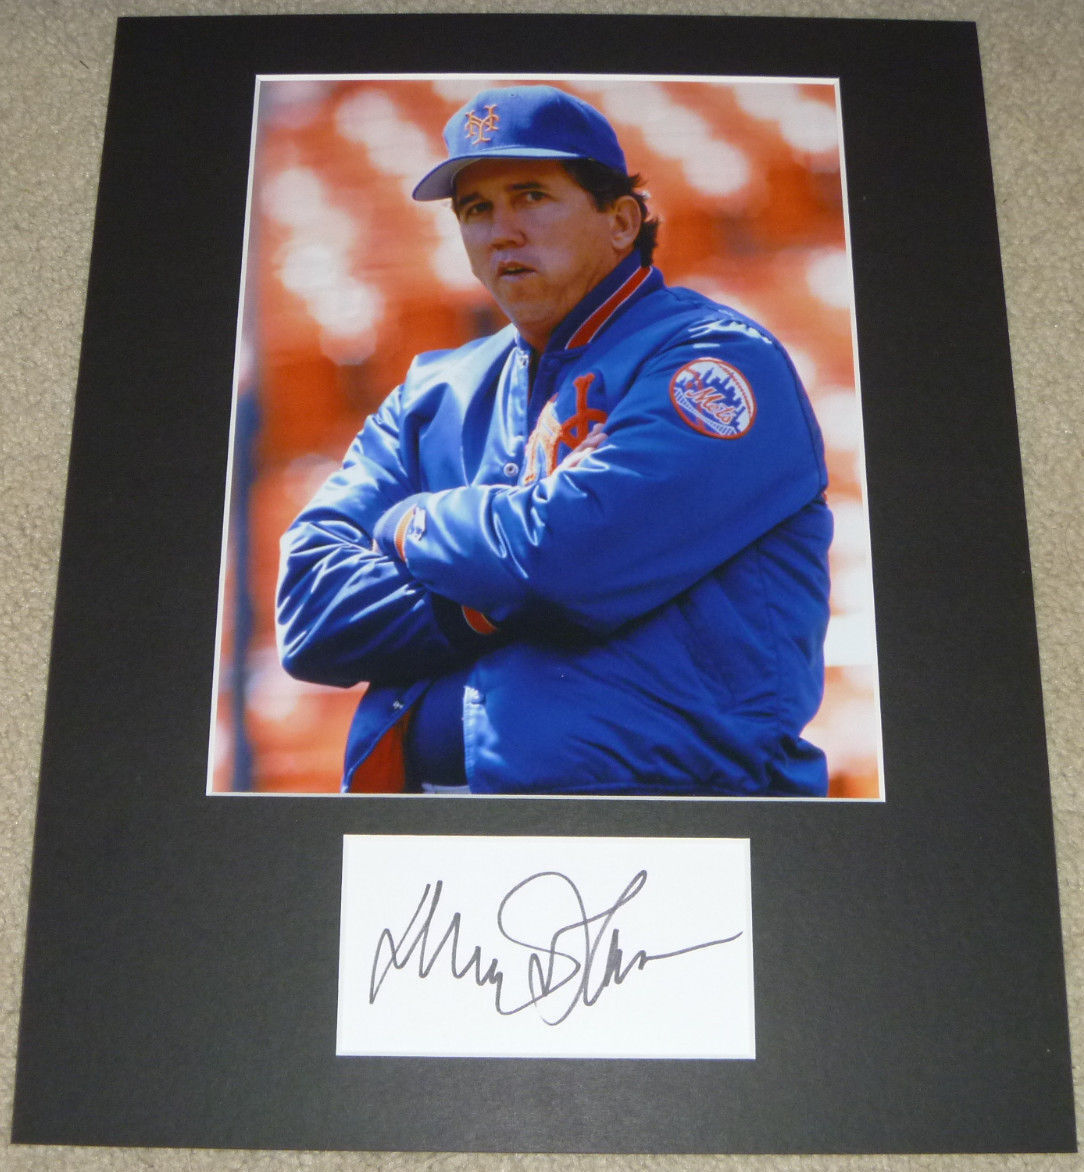 Davey Johnson Authentic Signed Matted Photo Poster painting Display Autographed NY Mets Baseball